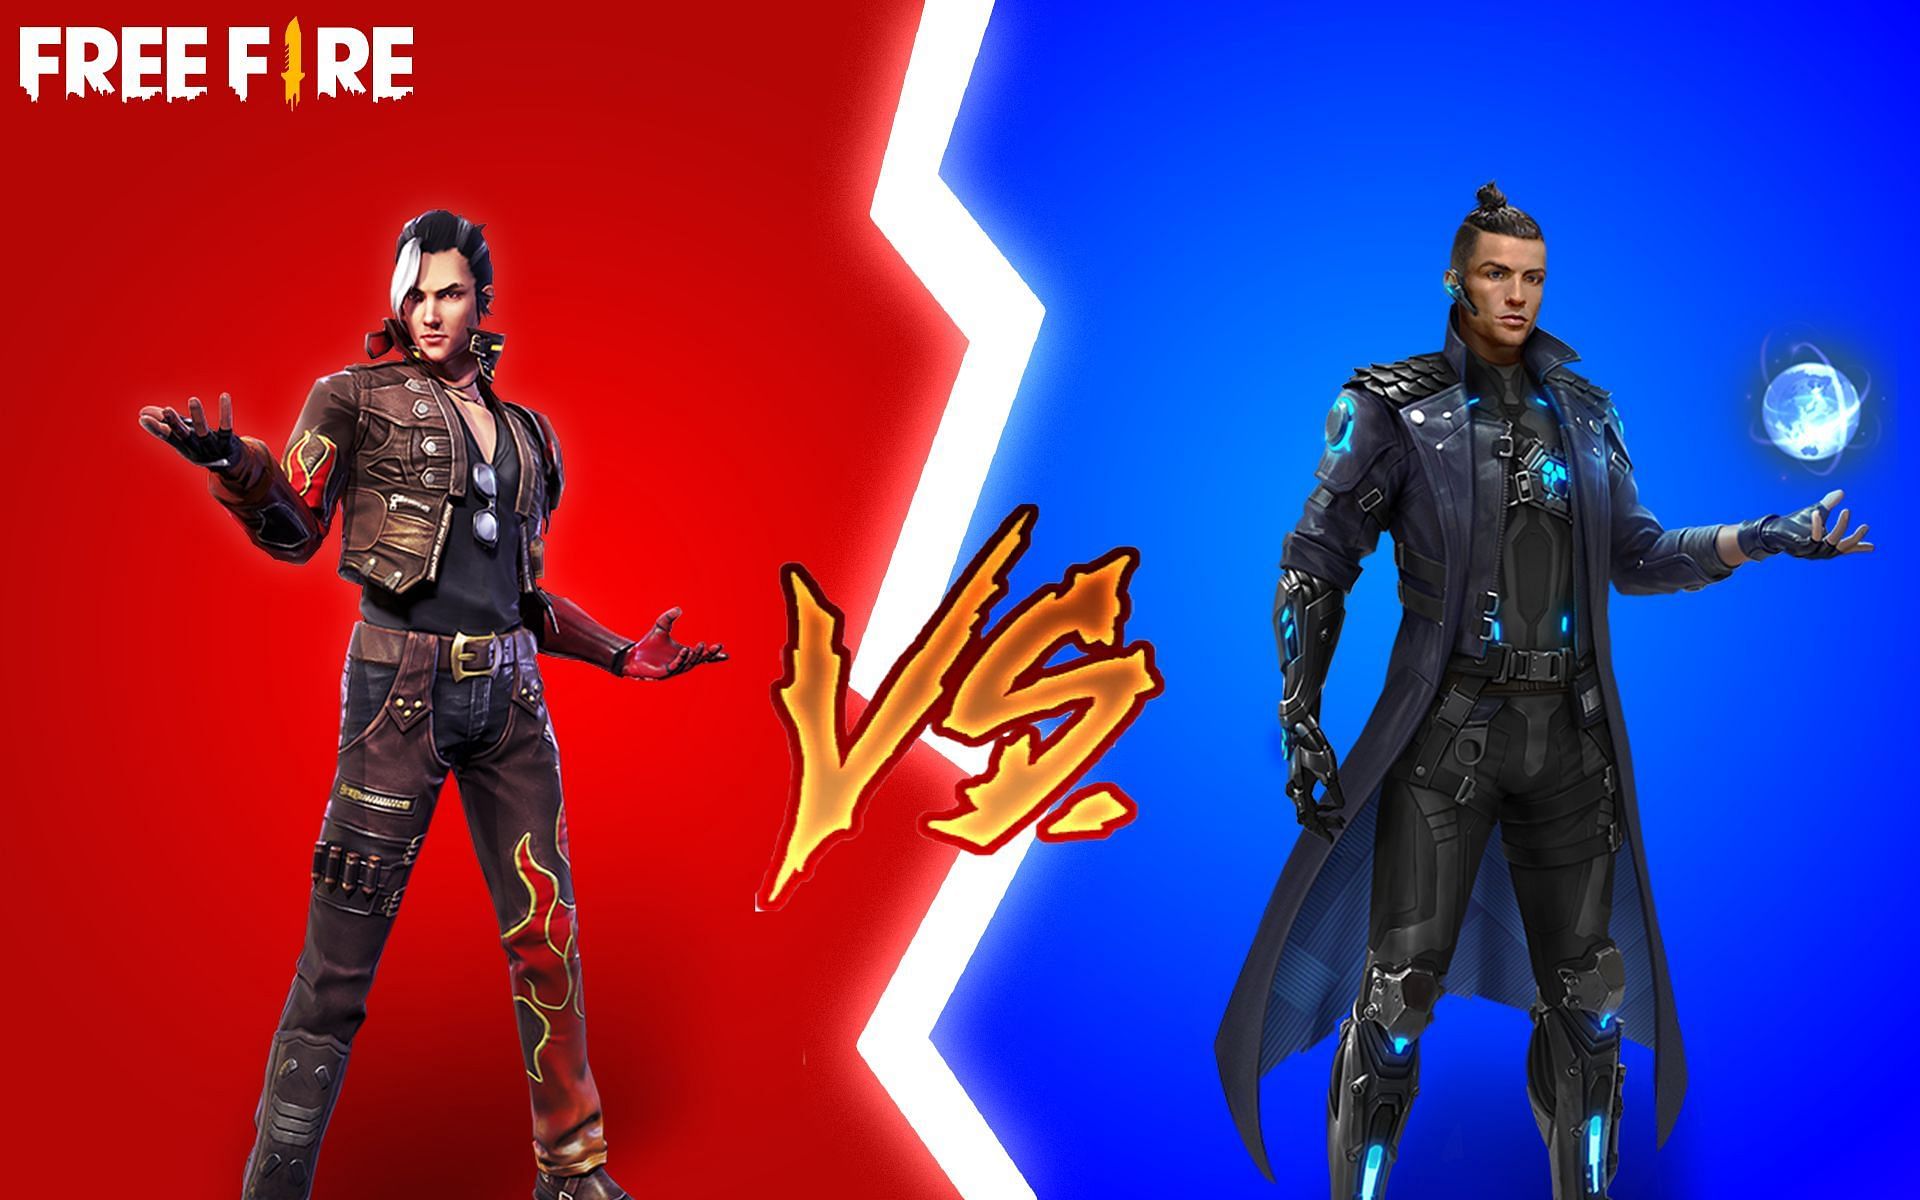 Elite Hayato vs Chrono: Who is the better Free Fire character after the OB31 update? (Image via Sportskeeda)